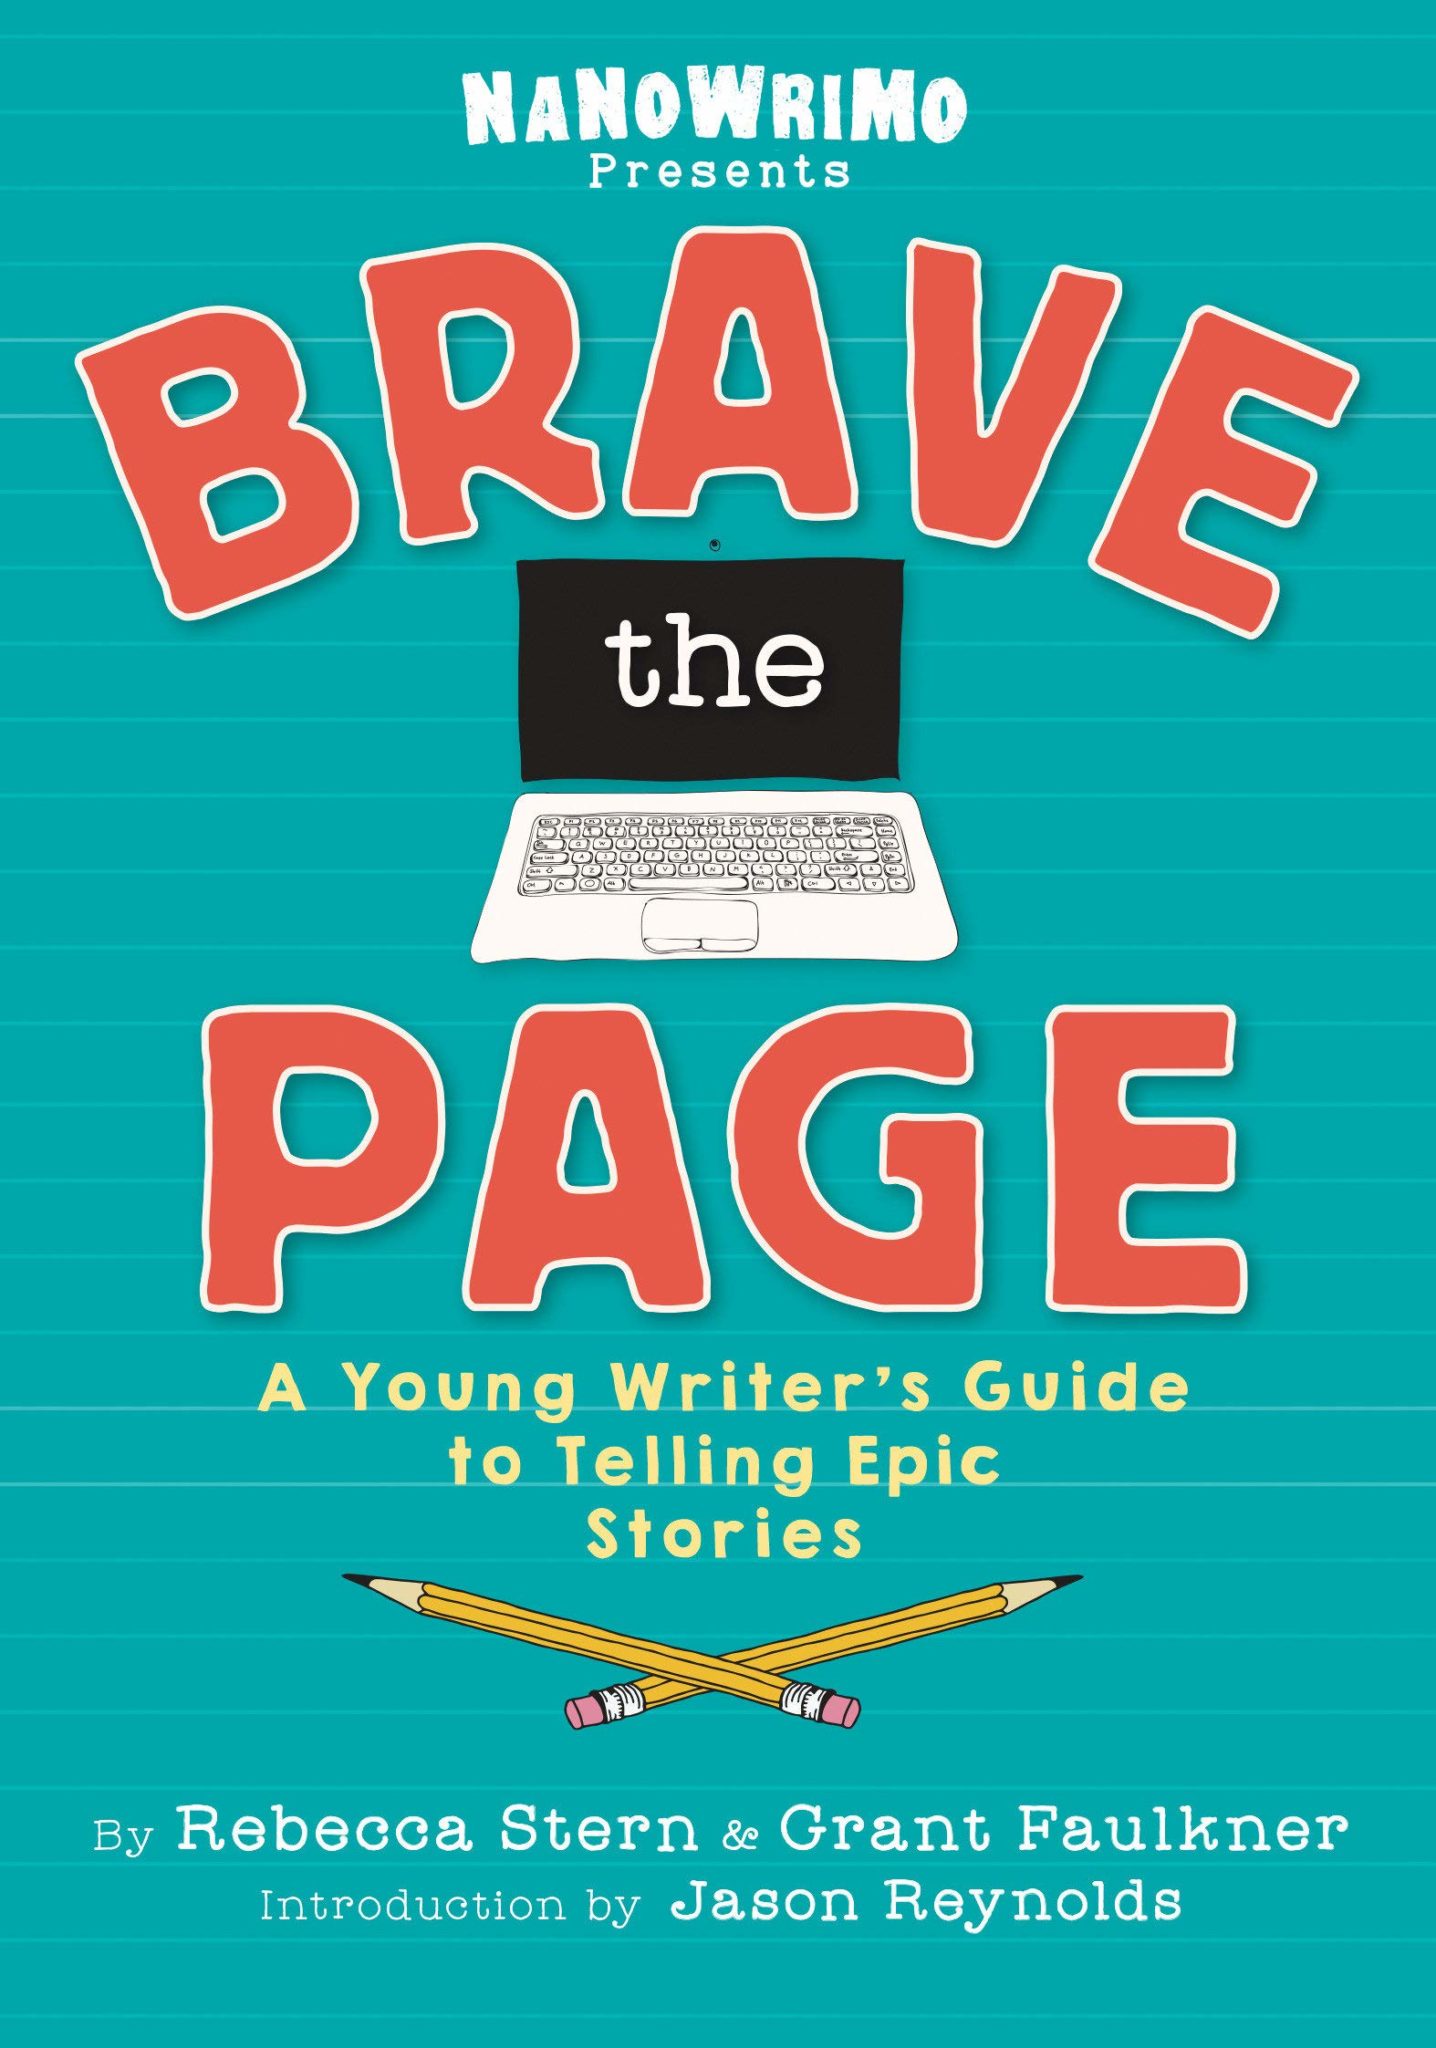 "Brave Page" by Rebecca Stern and Grant Faulkner